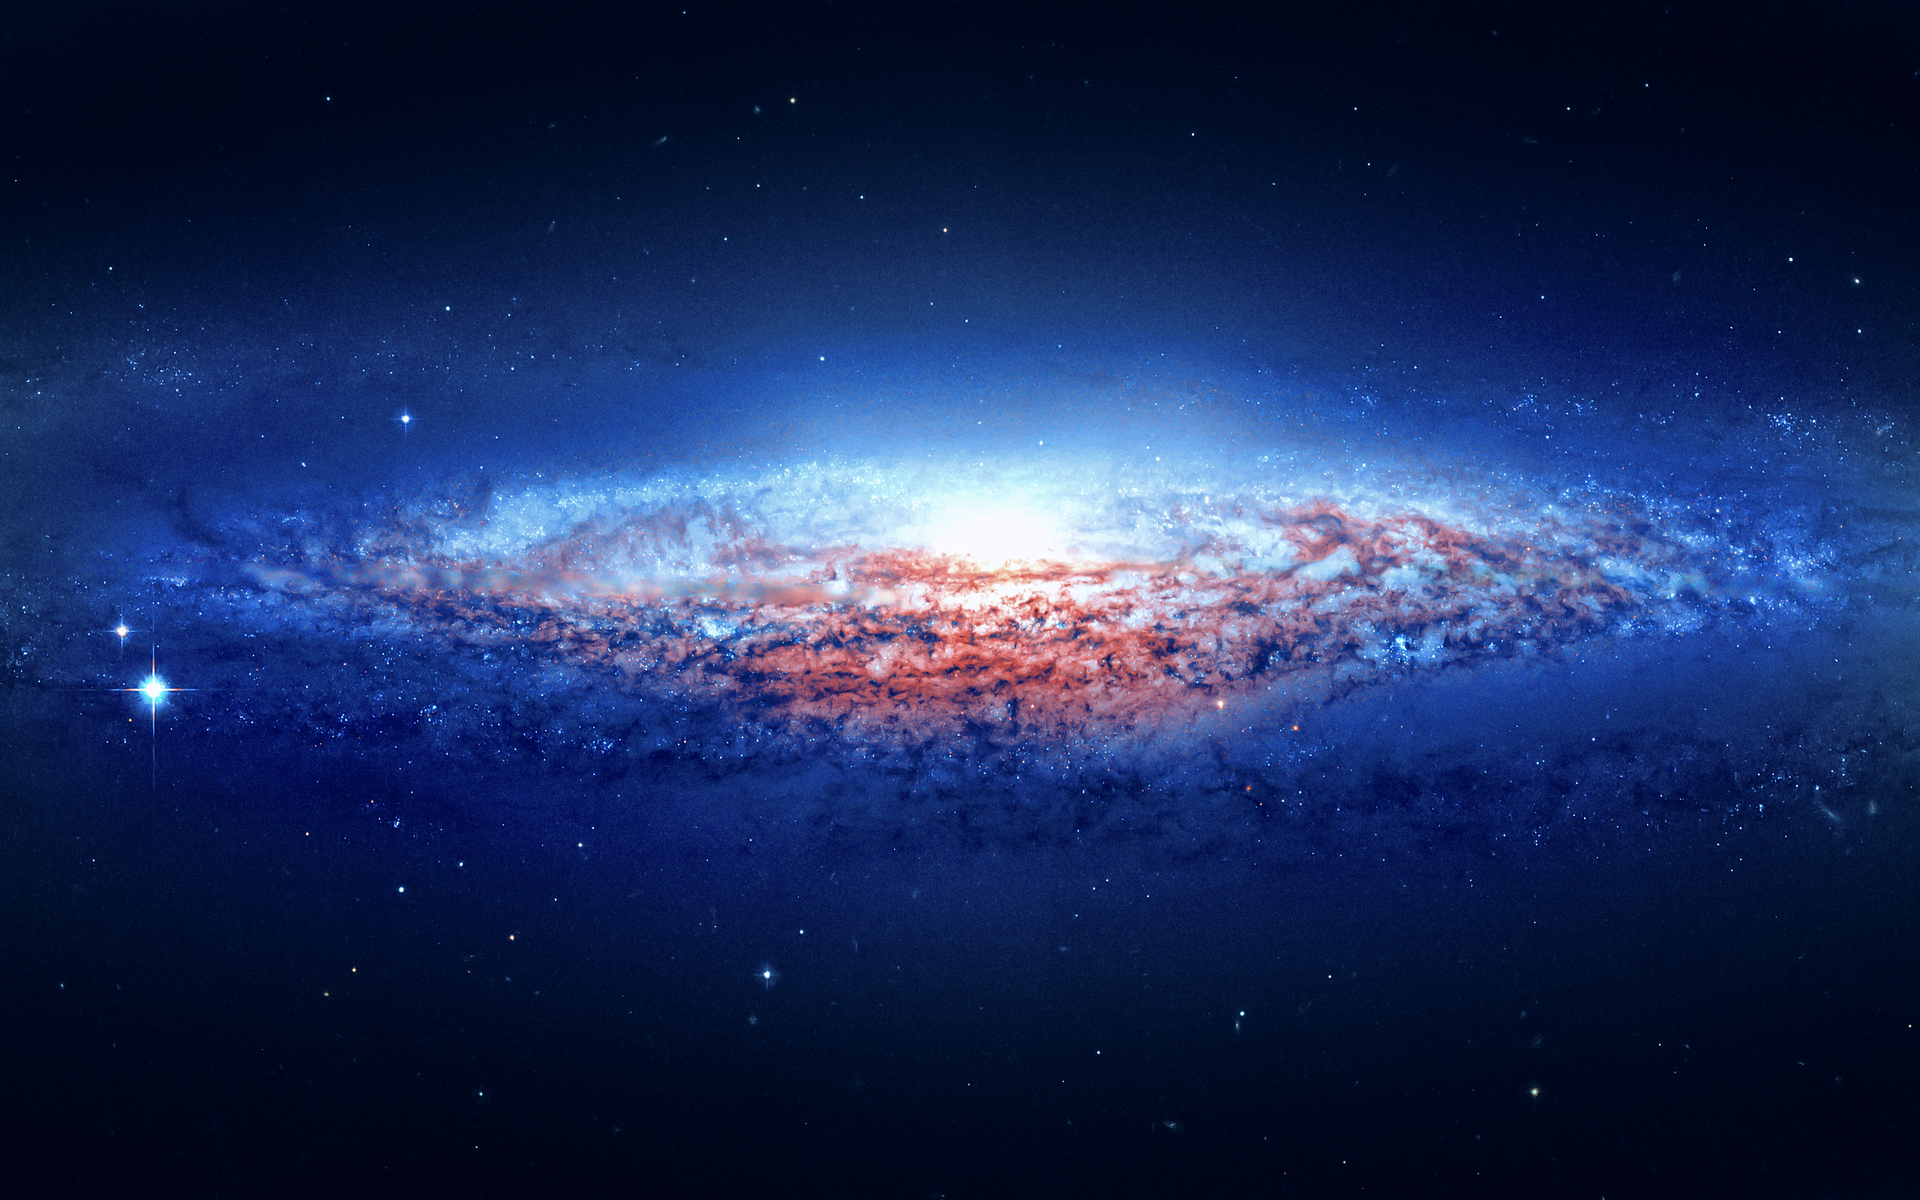 Free Download Galaxy Background Png 109 Images In Collection Page 3 1920x1200 For Your Desktop Mobile Tablet Explore 99 Galaxy Wallpaper Png Png Wallpaper Png Wallpapers Hd Wallpaper Png